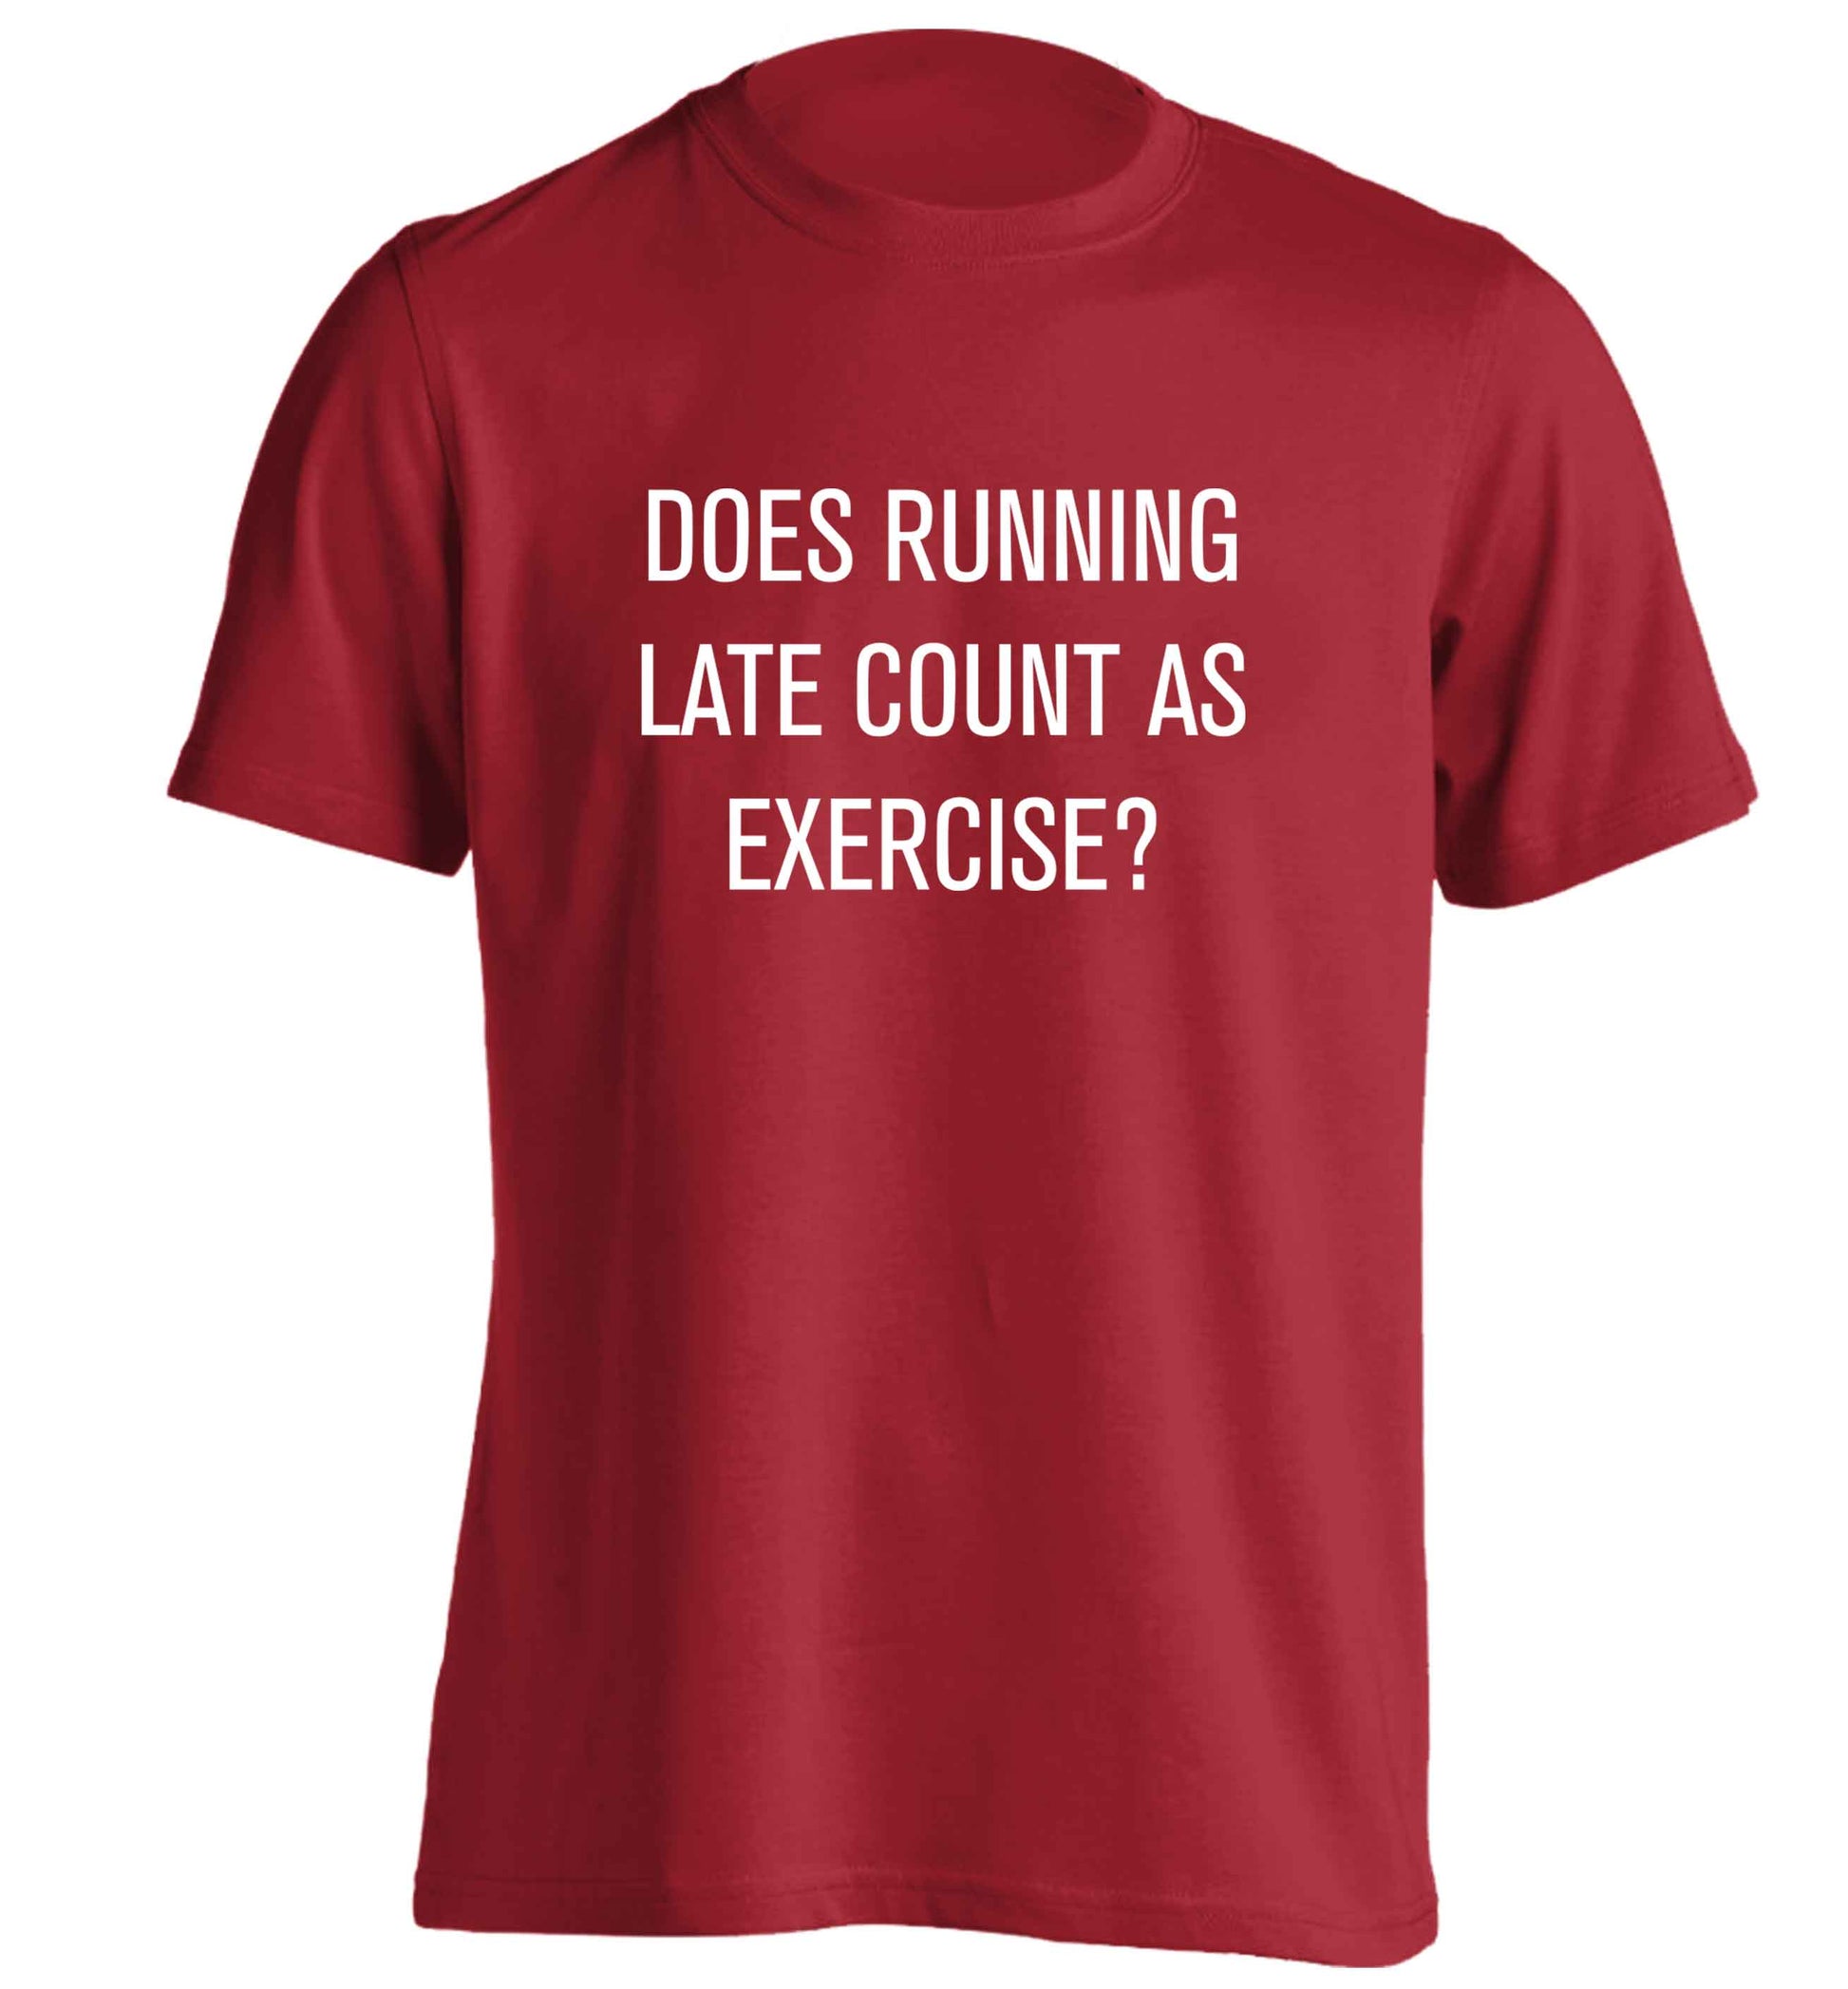 Does running late count as exercise? adults unisex red Tshirt 2XL